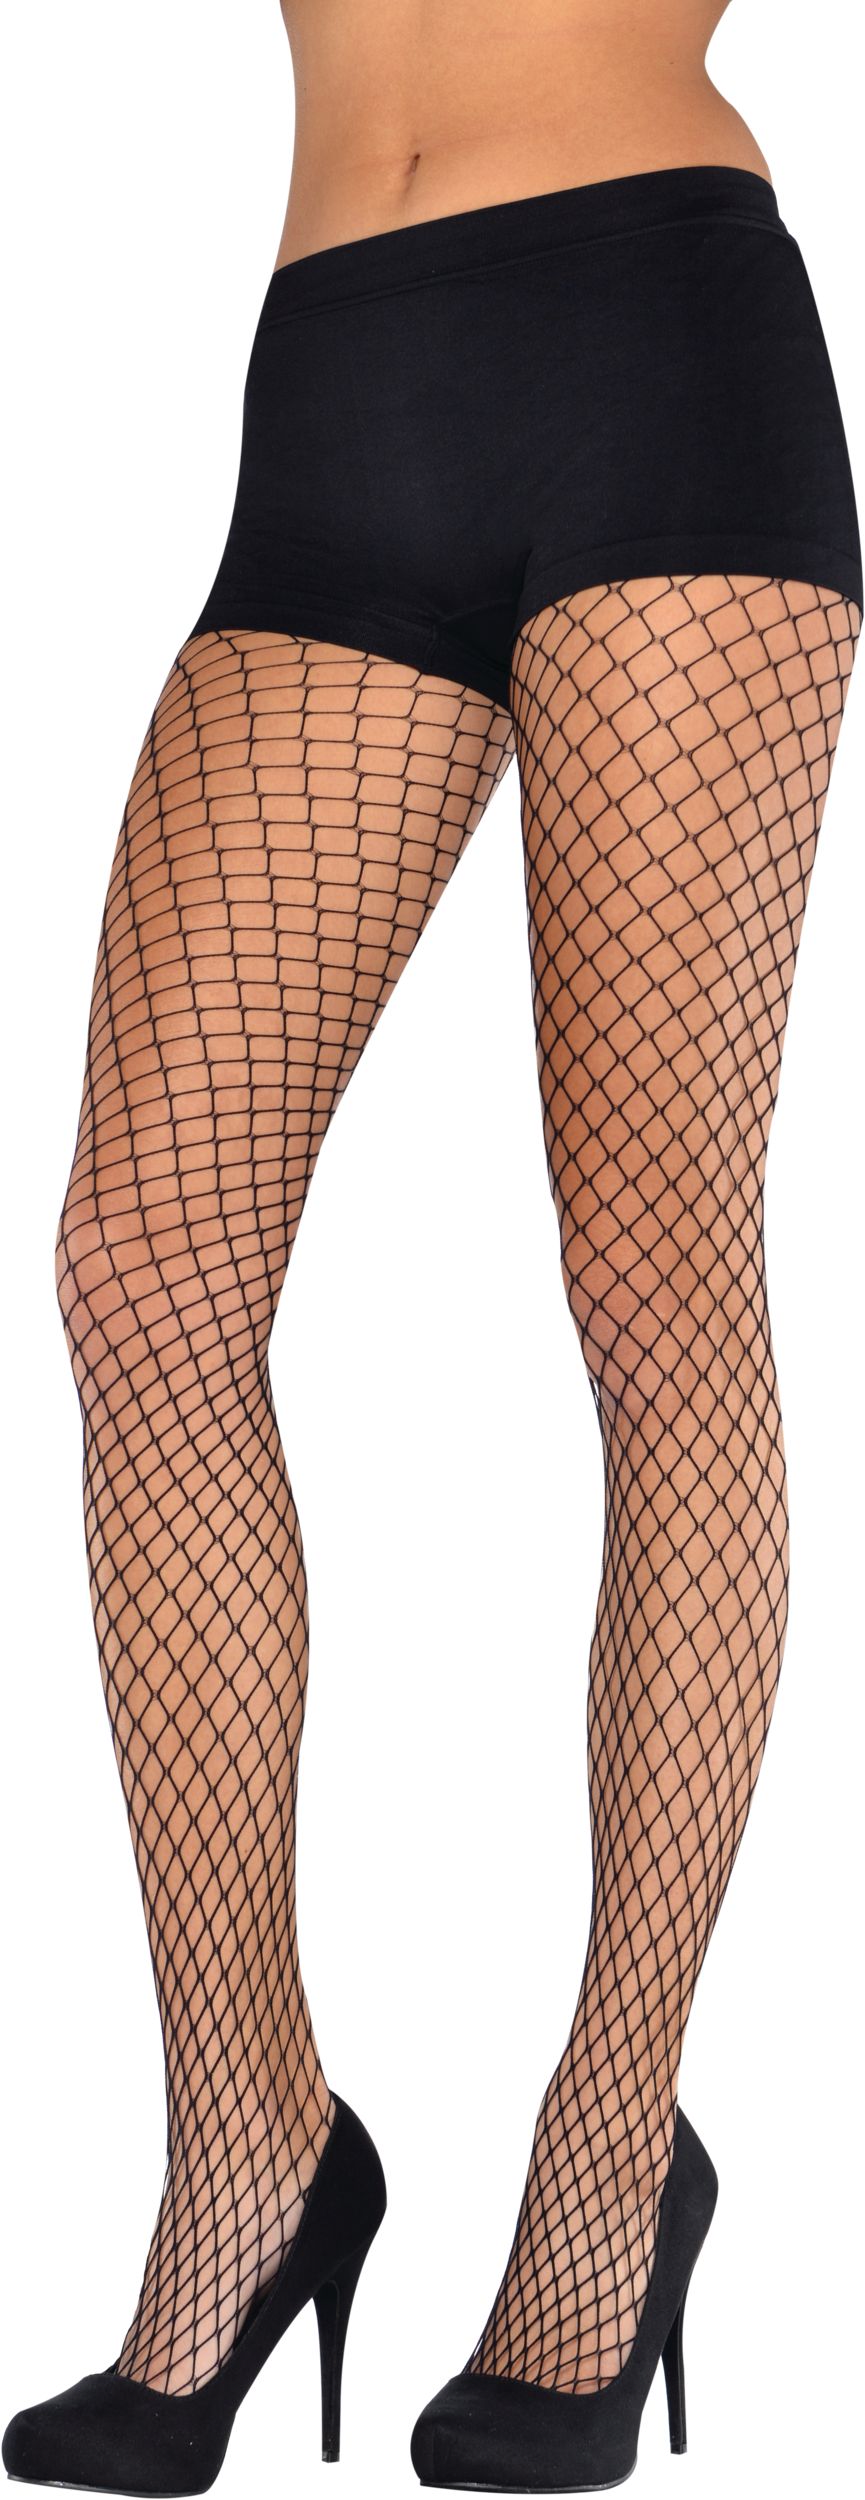 Wide Diamond Fishnet Pantyhose, Adult, More Options Available